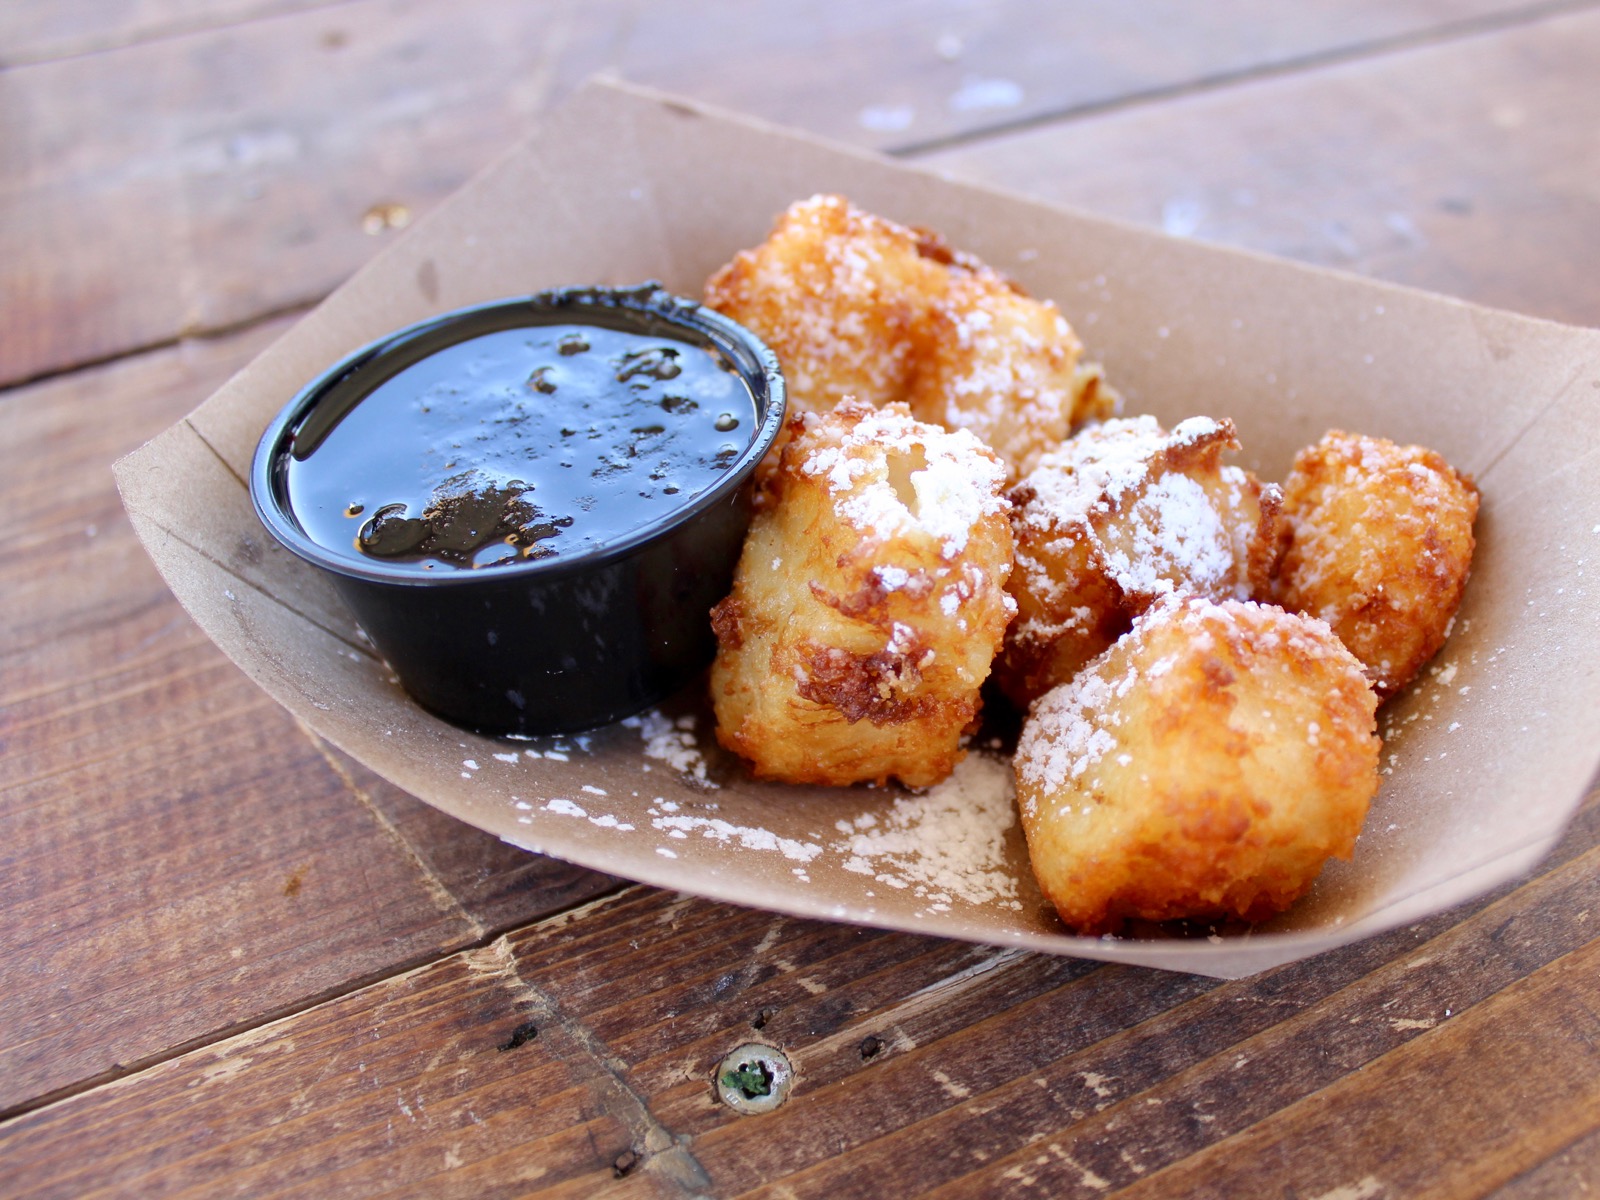 15 new Wisconsin State Fair foods, reviewed and ranked